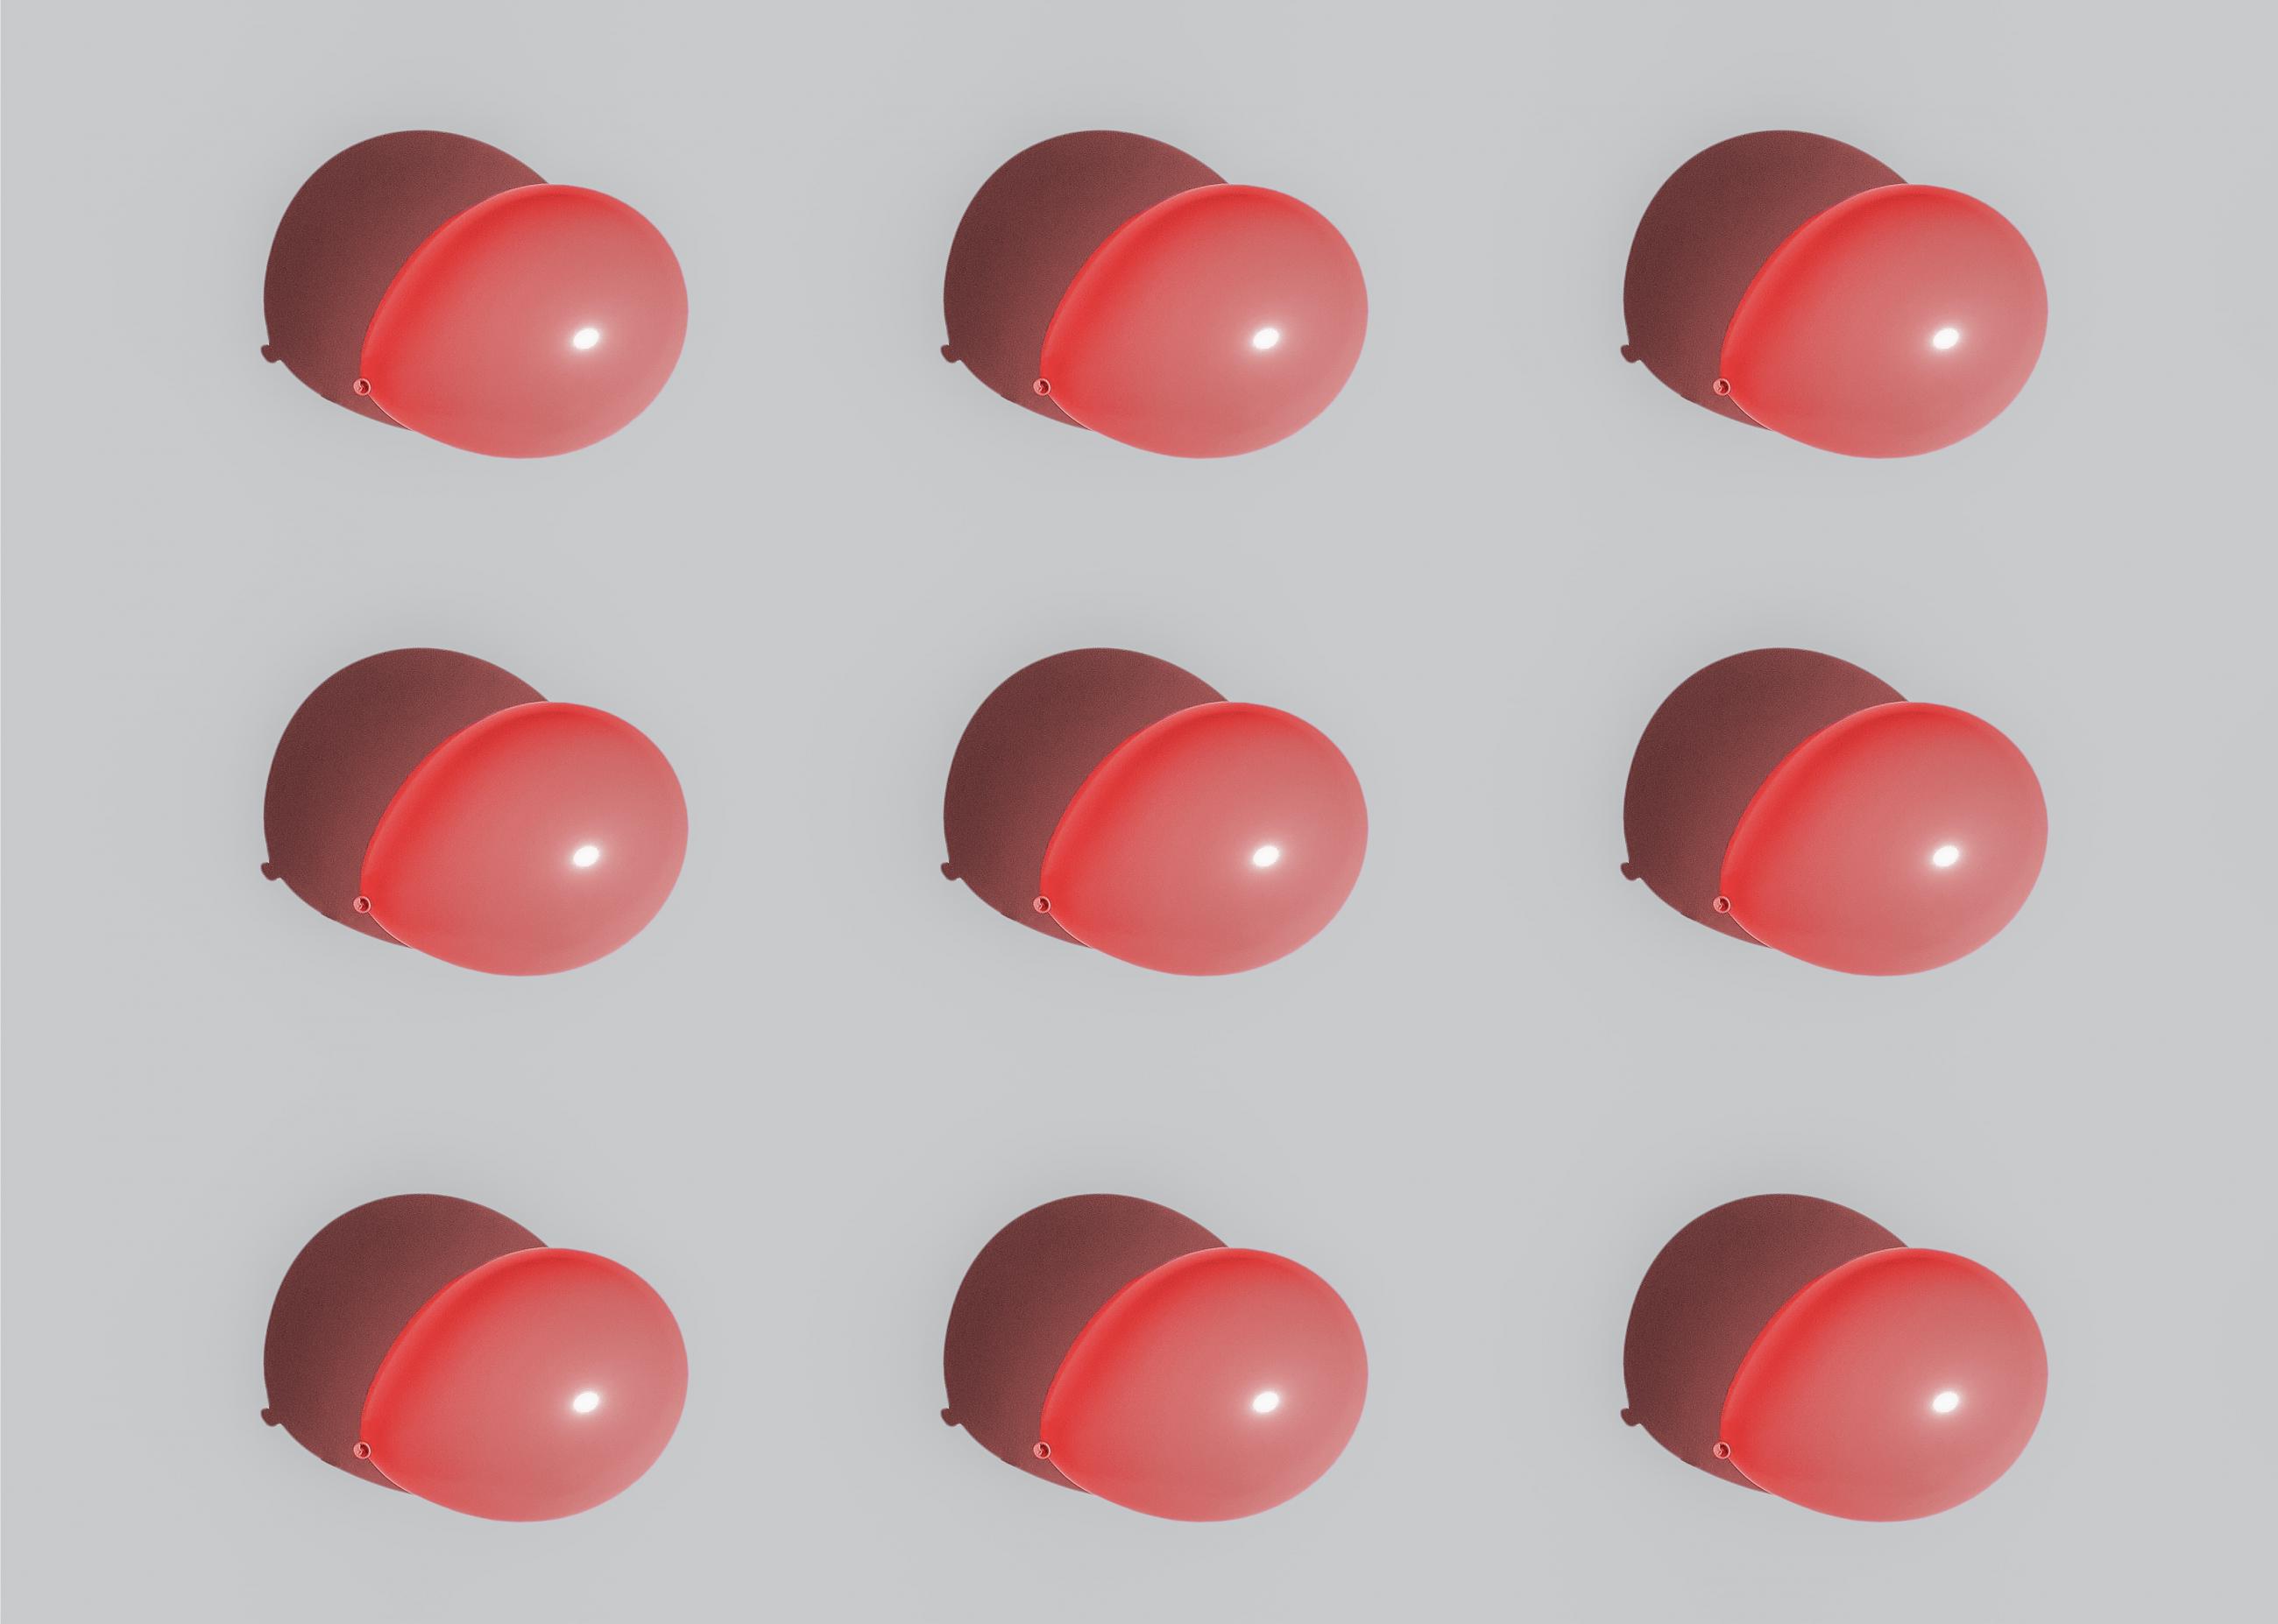 Nine red blown up balloons aligned in rows of three against a white background